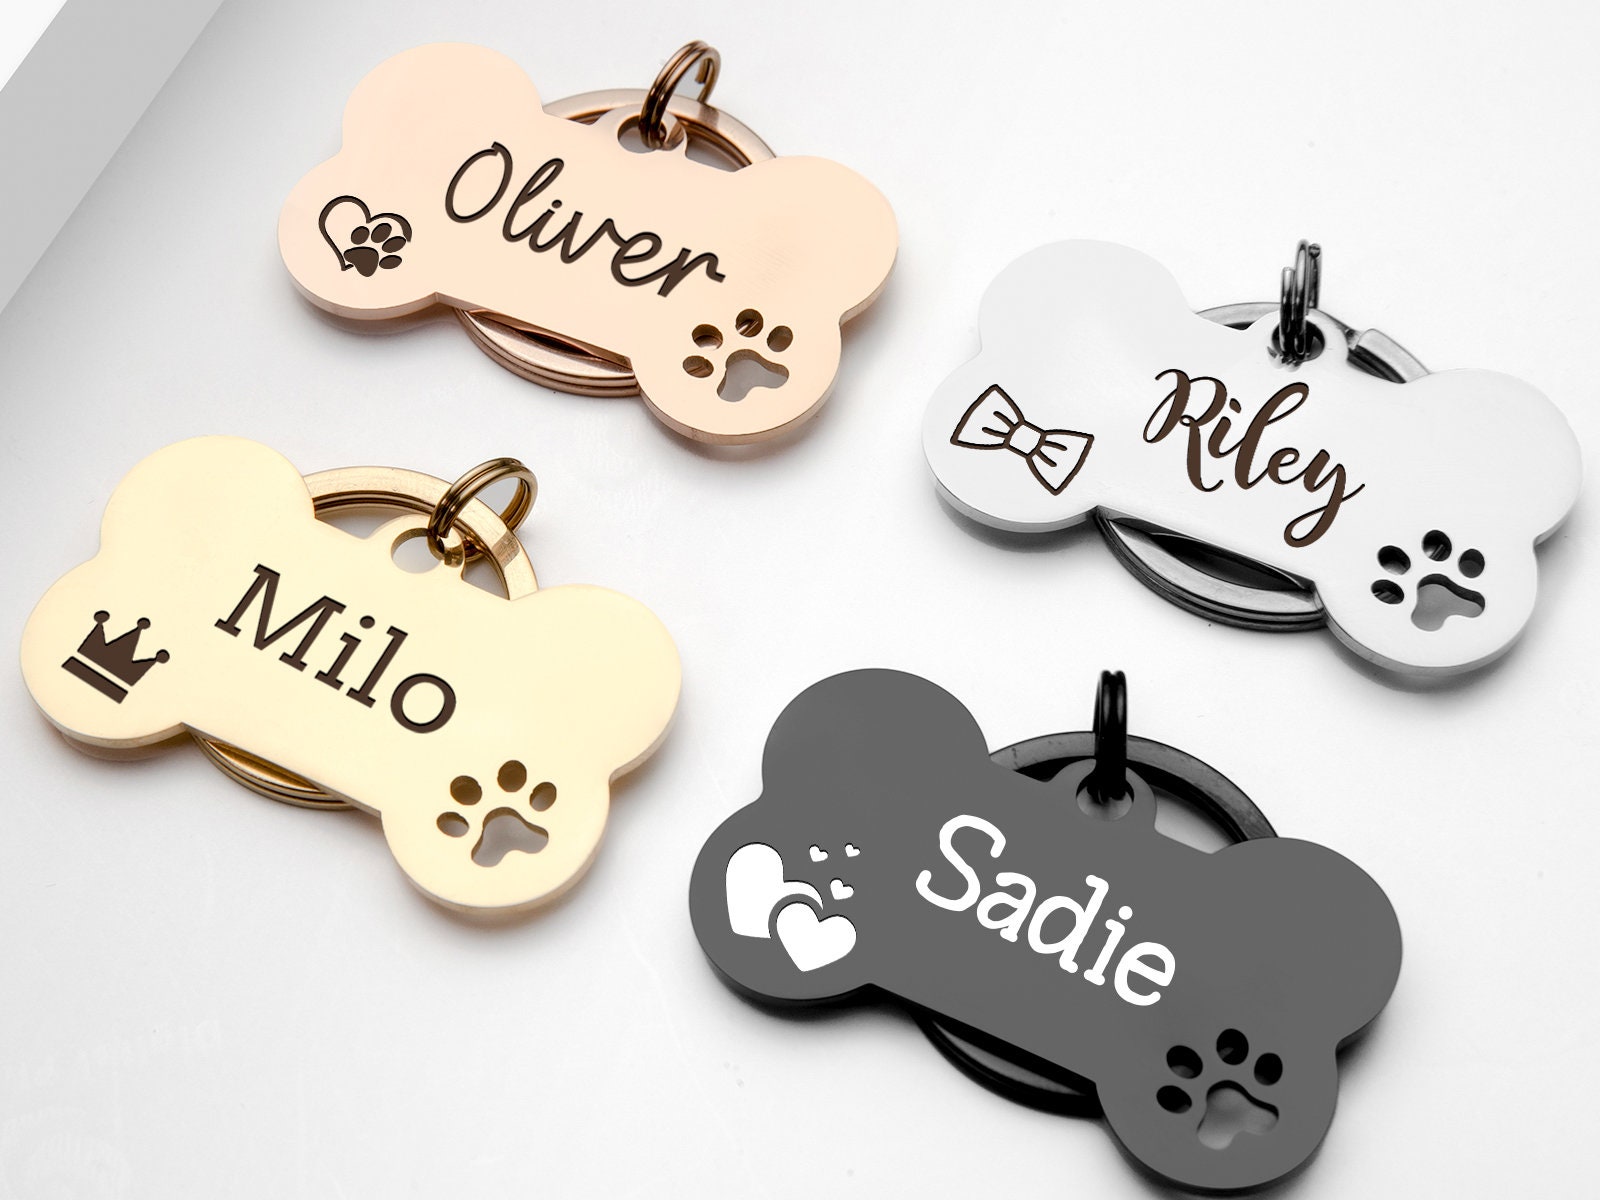 Metal Tags for Labeling World-Class Quality